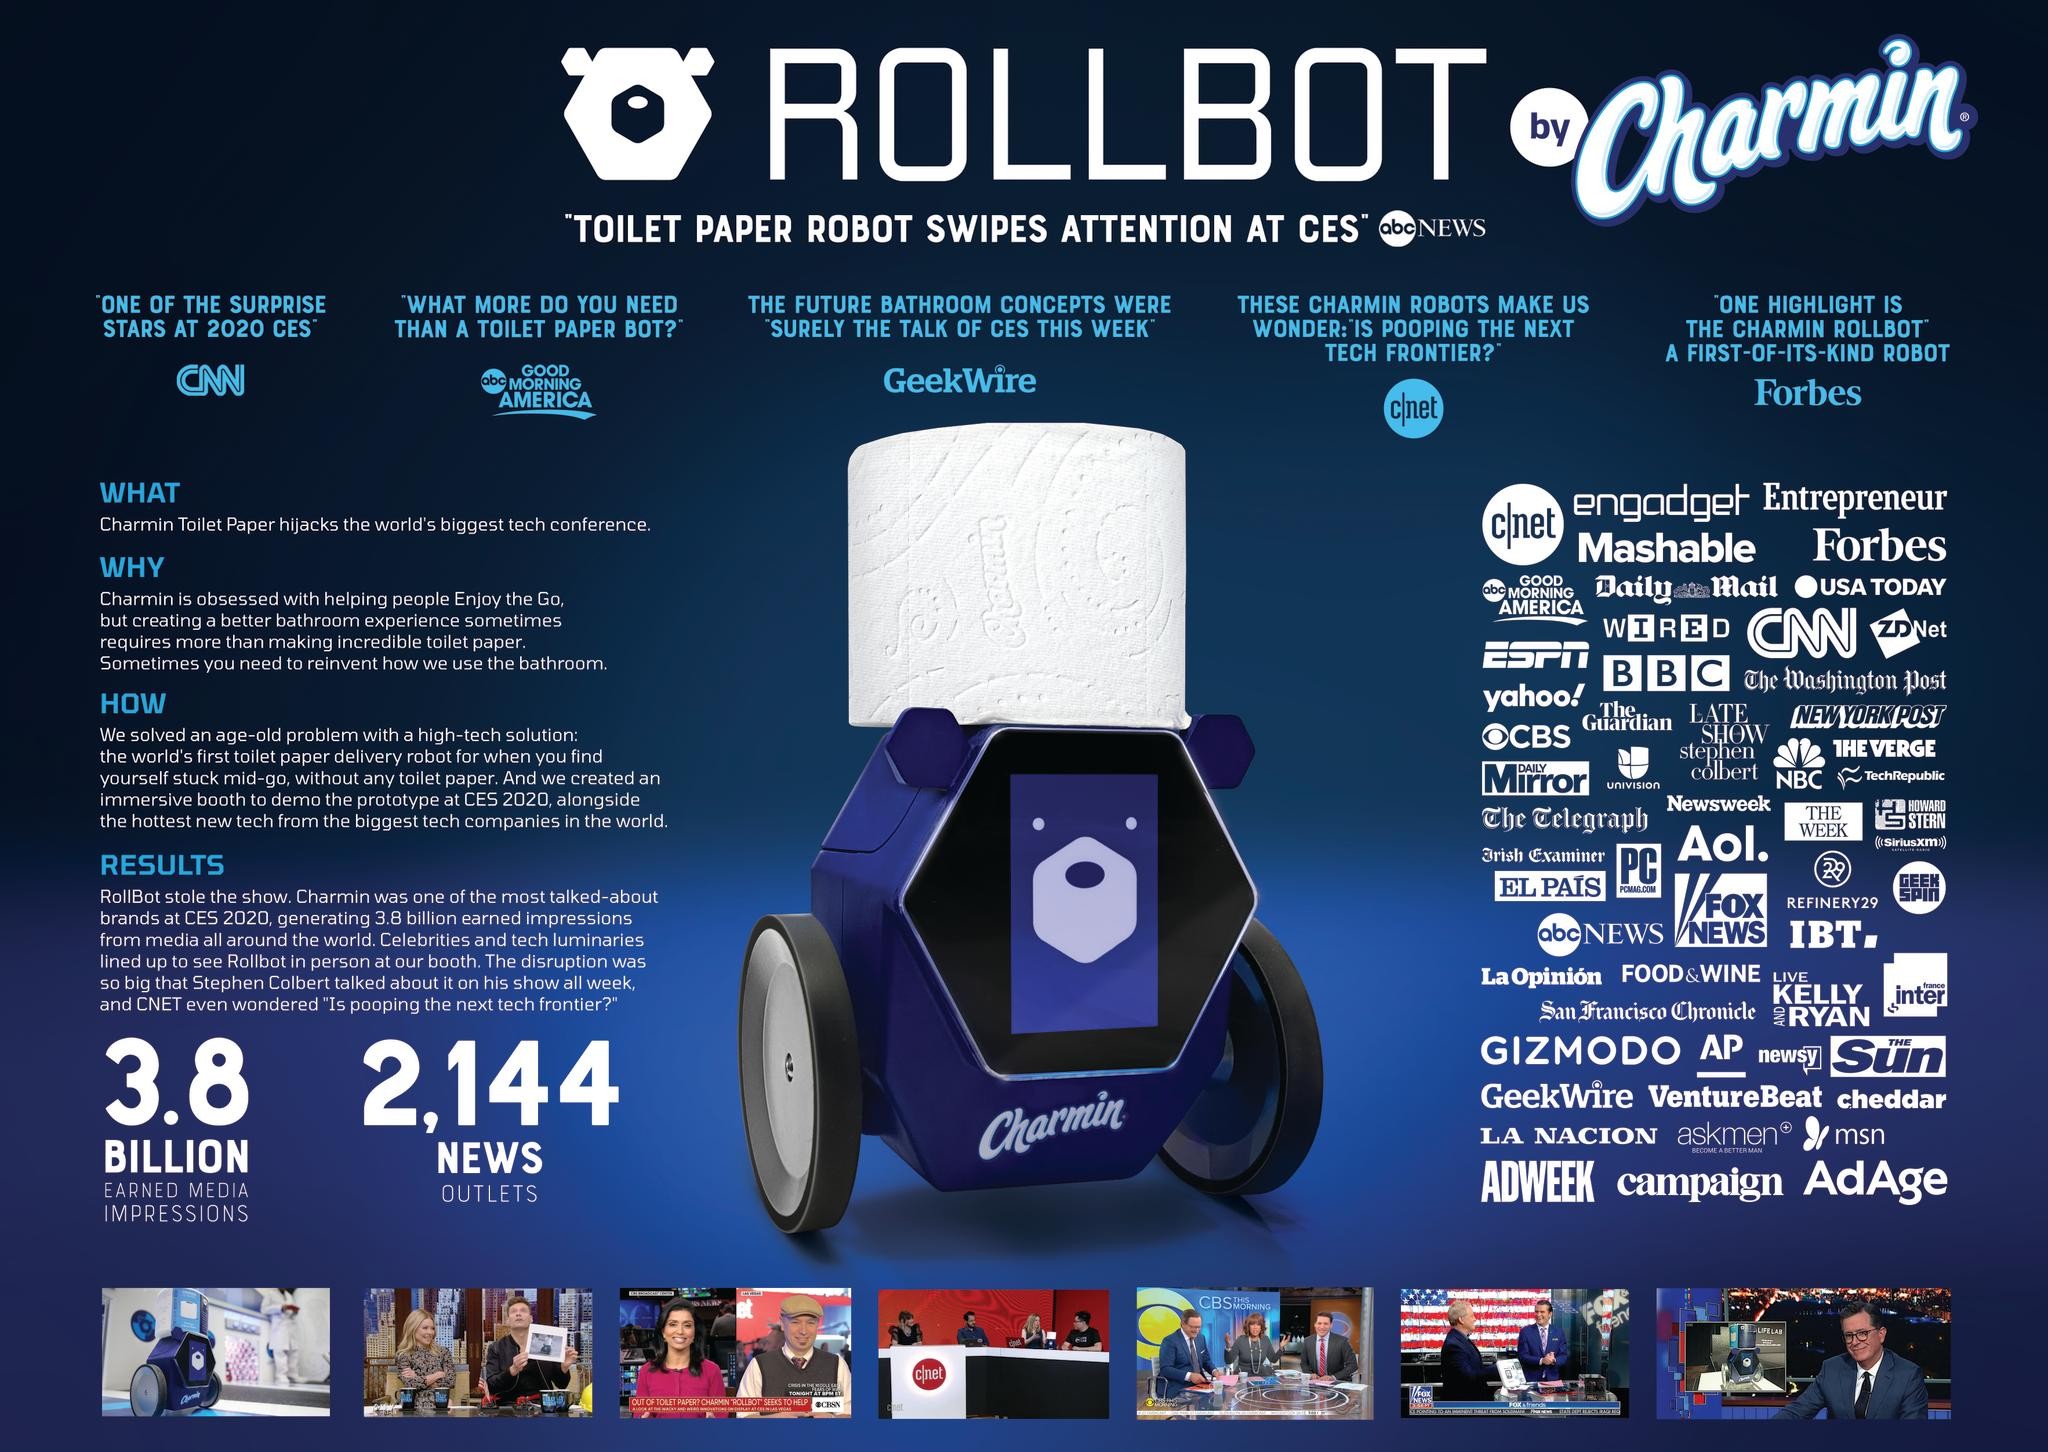 Rollbot, by Charmin